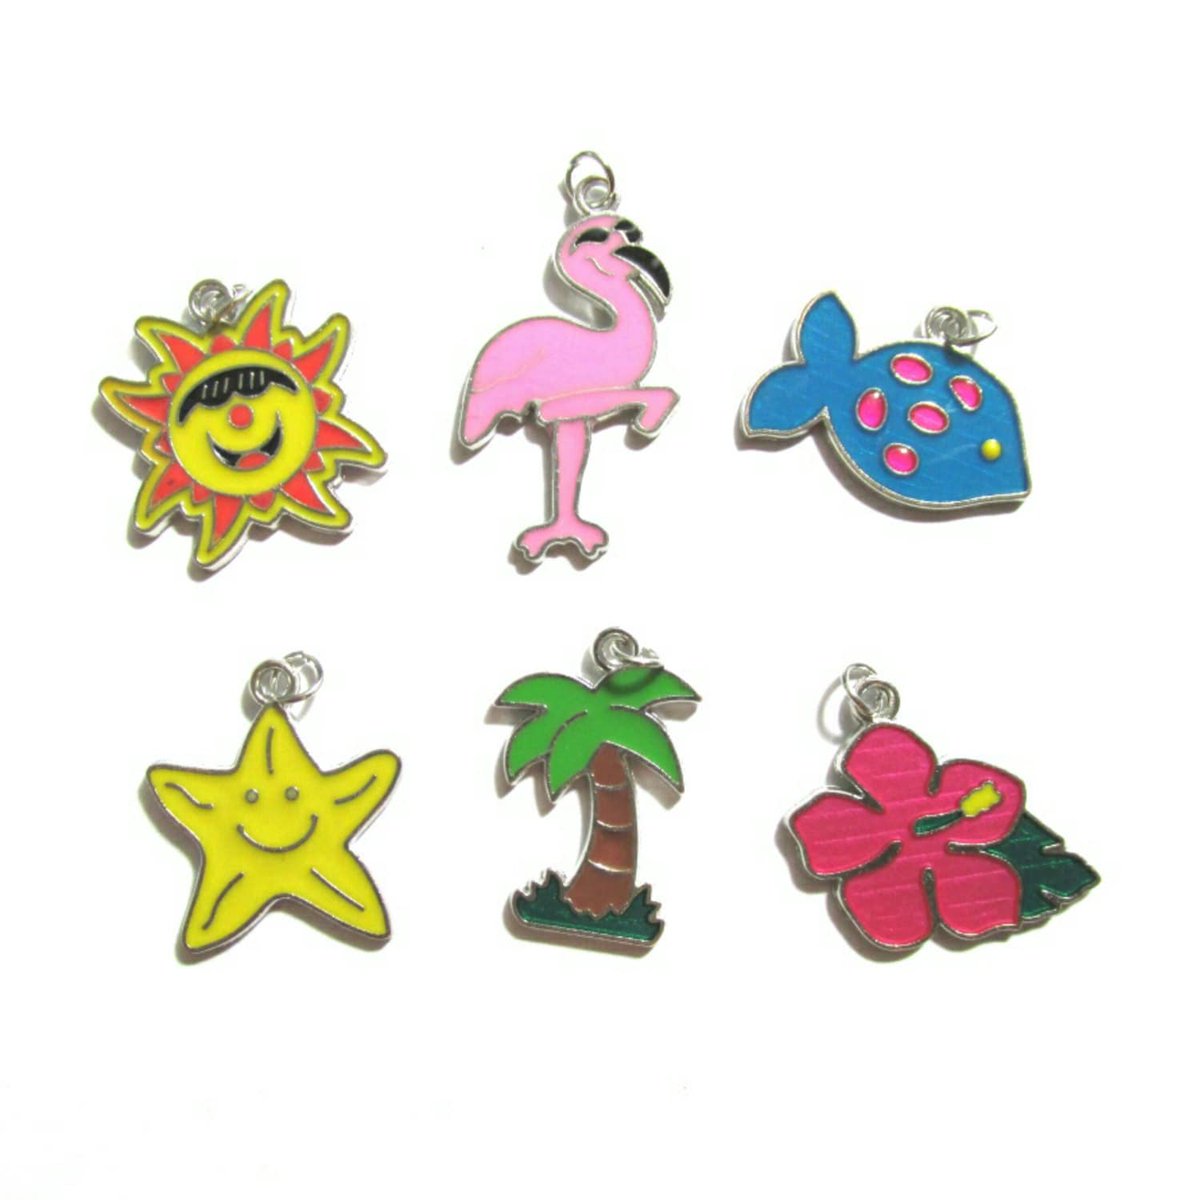 Florida Summer Charms | Pink Flamingo | Palm Tree Charms | Sun Charms | Hibiscus Flower Charms tuppu.net/c79bc5e4 #aromatheraphy #Warehouse1711 #candleoils #glitter #candlemaker #handmadecandles #dtftransfers #explorepage #JewelryCharms